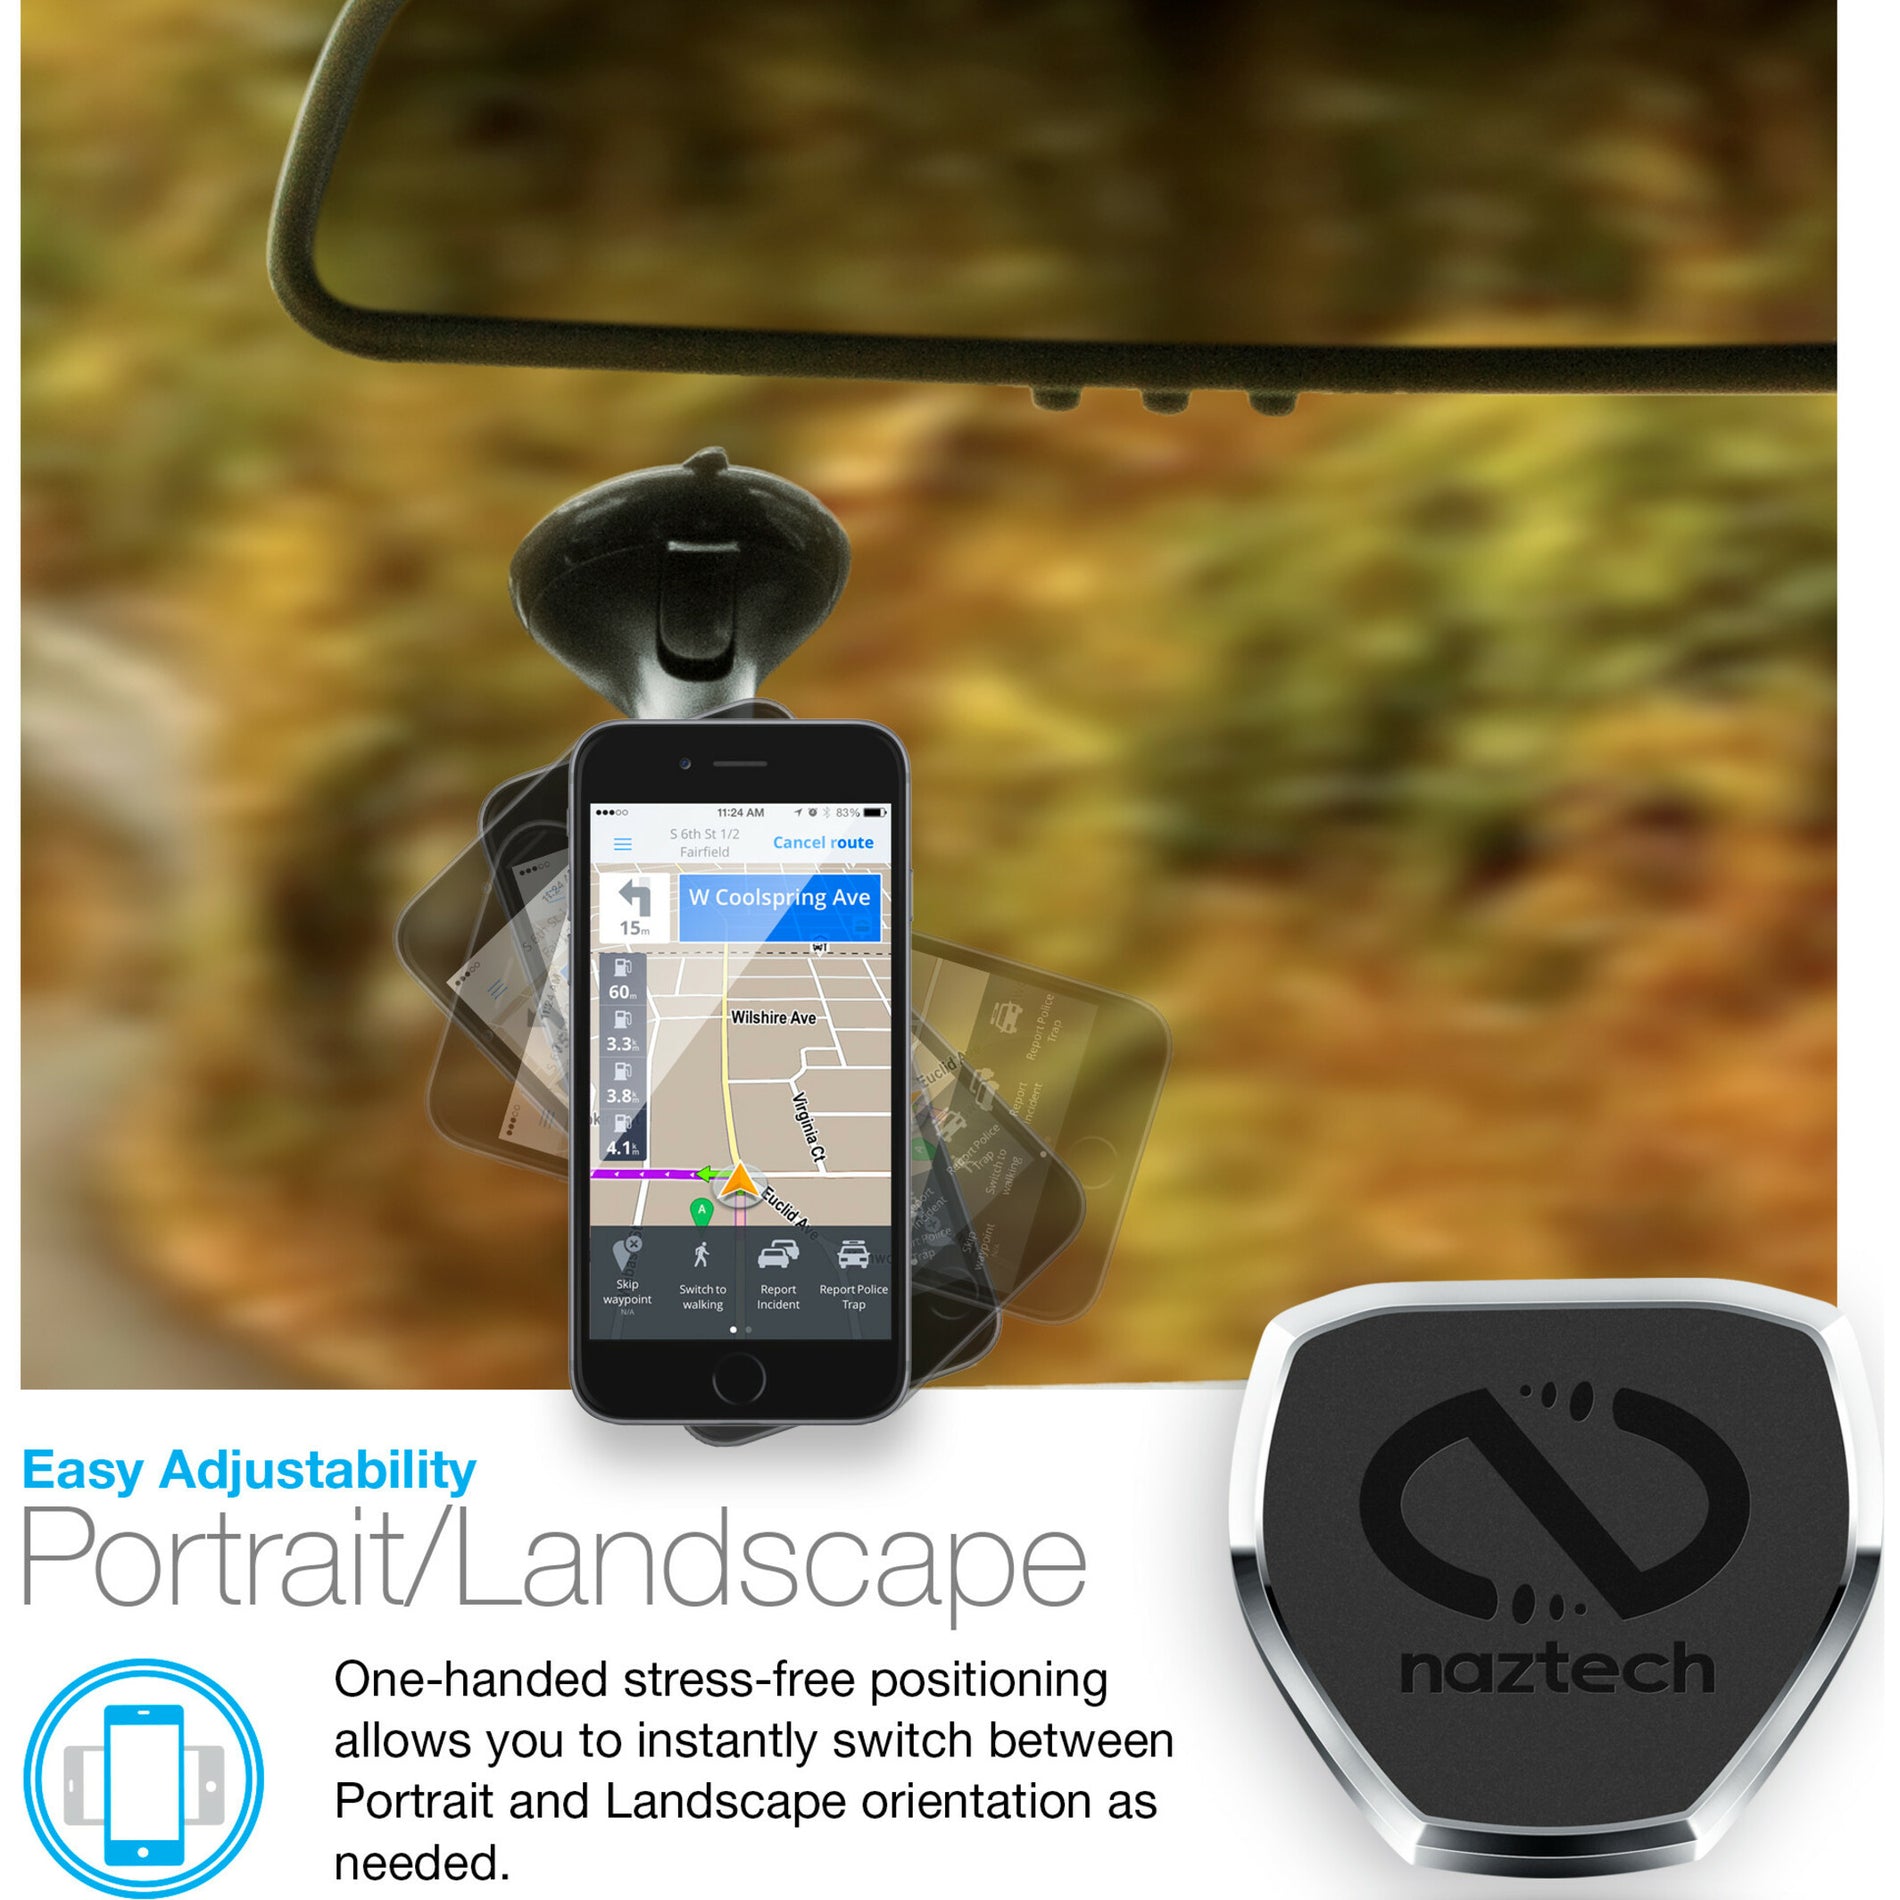 Hypercel 13575 MagBuddy Windshield Mount, Powerful Suction Cup for Secure Cell Phone and Smartphone Mounting